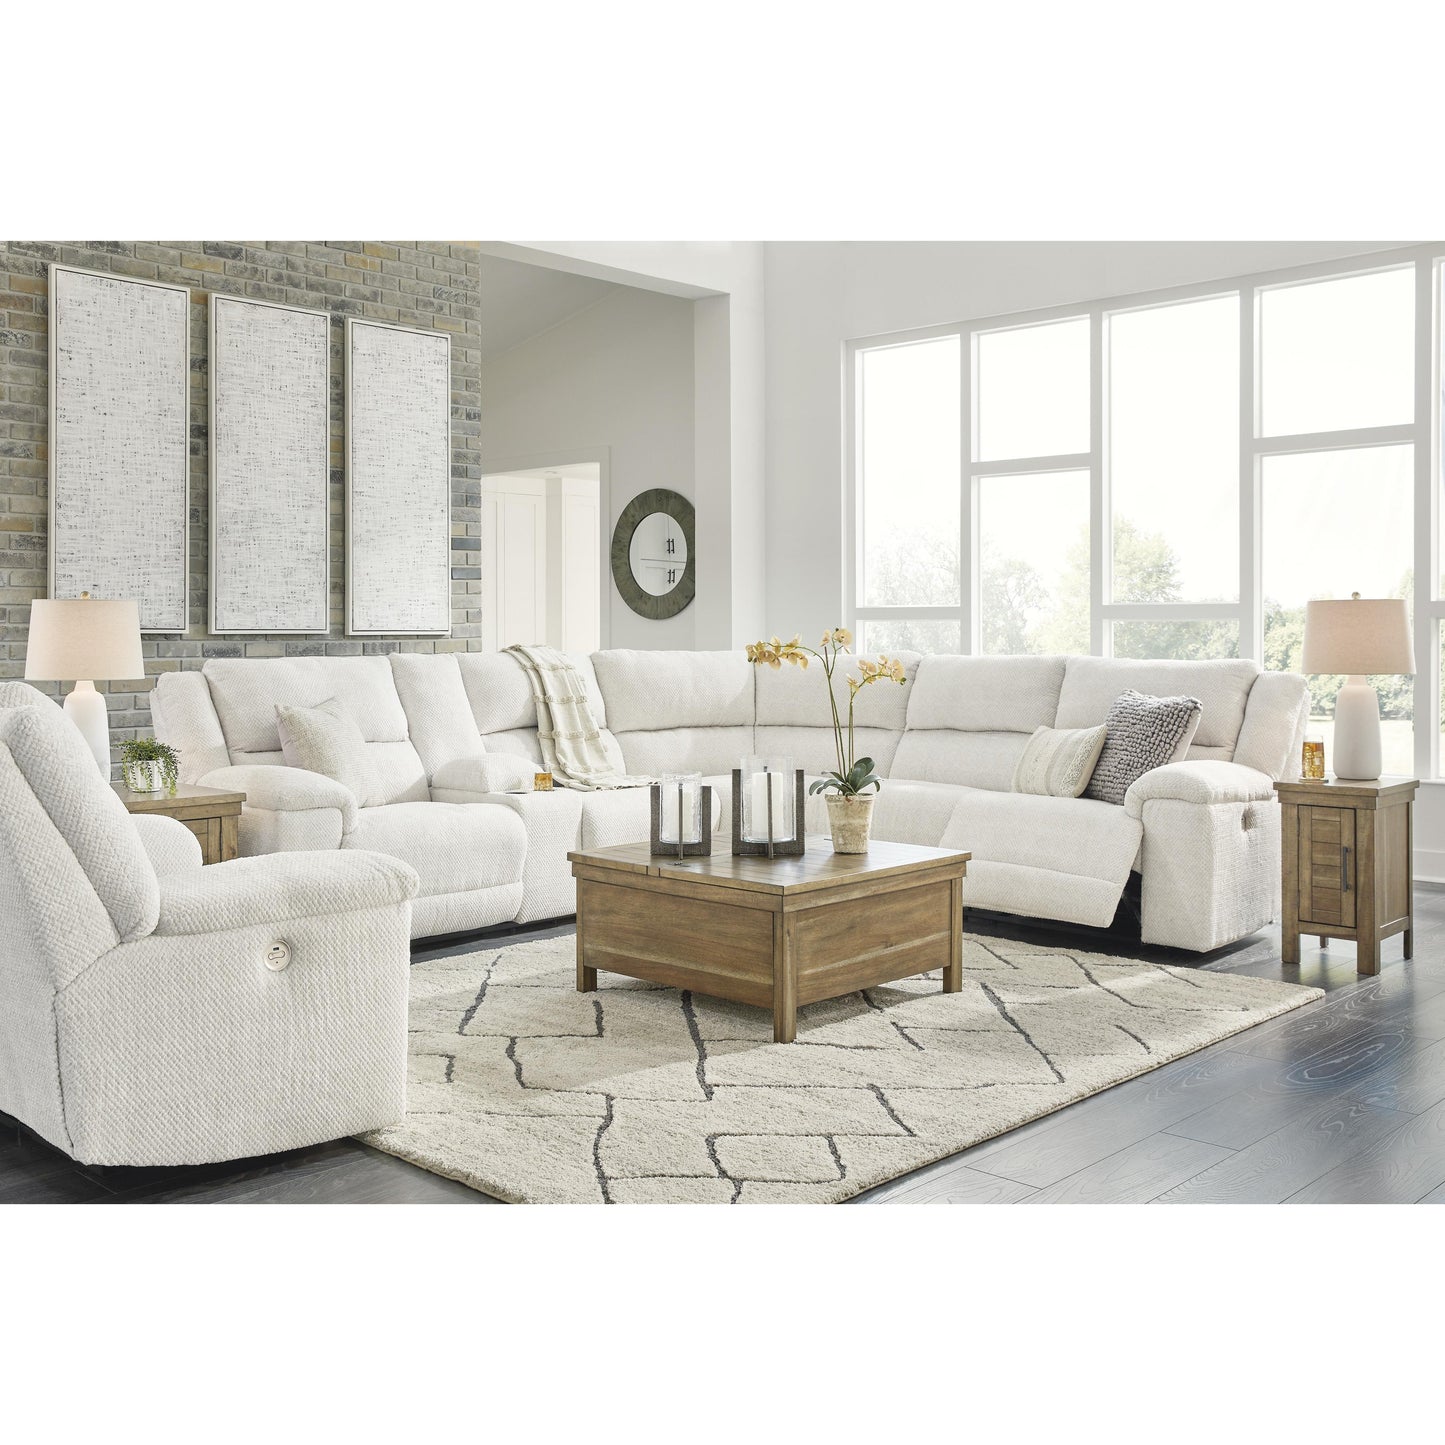 Signature Design by Ashley Keensburg Power Reclining Fabric 3 pc Sectional 6180701/6180777/6180775 IMAGE 5